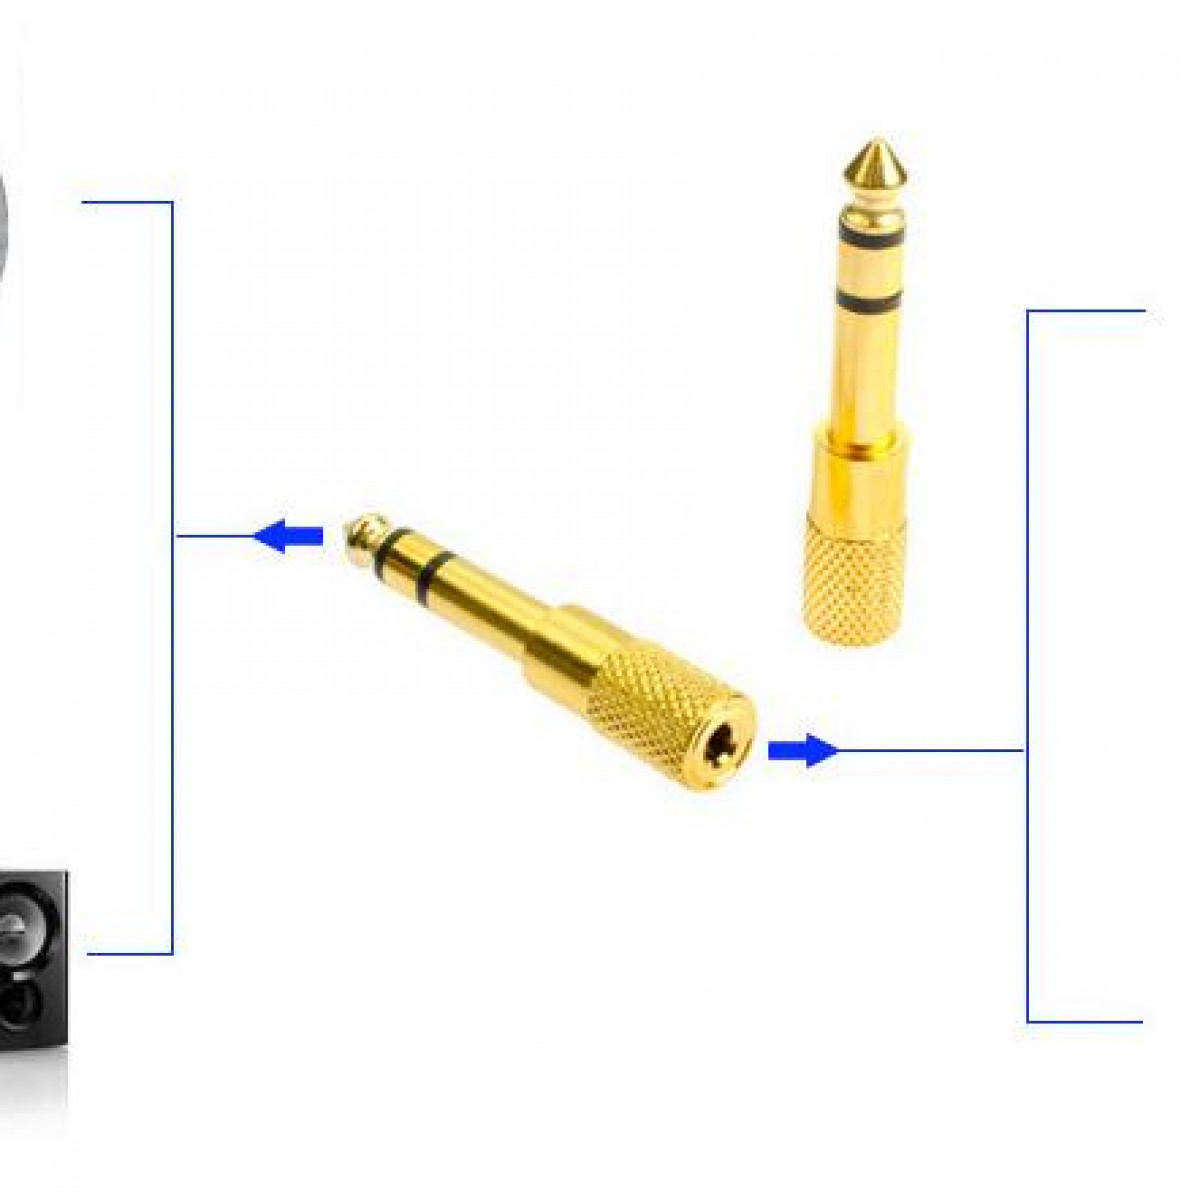 6.5 mm auf mm 3.5 - Audioadapter INF Adapter